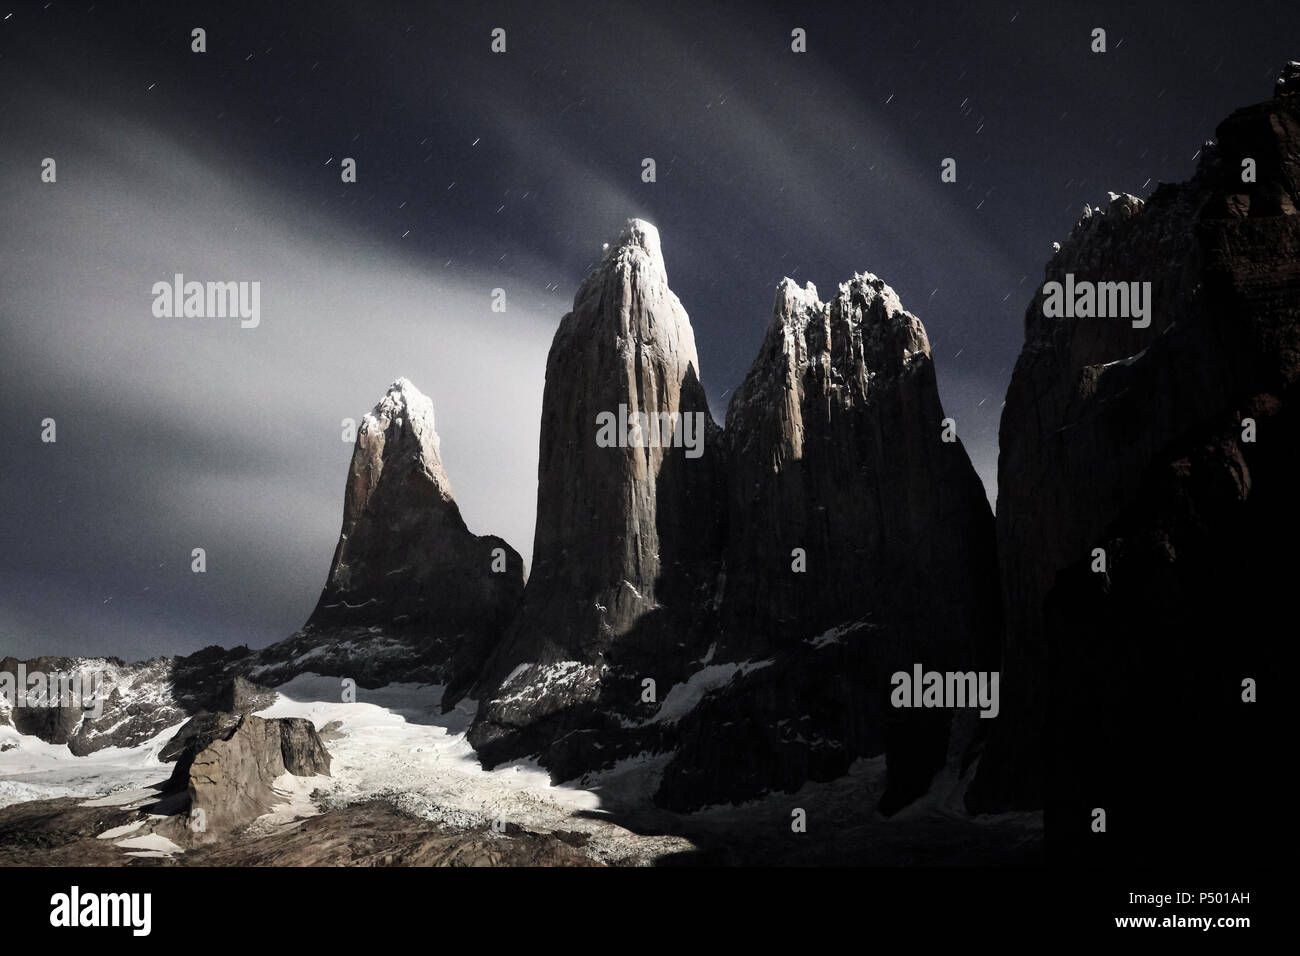 Chile, Patagonie, Nationalpark Torres del Paine at night Stock Photo